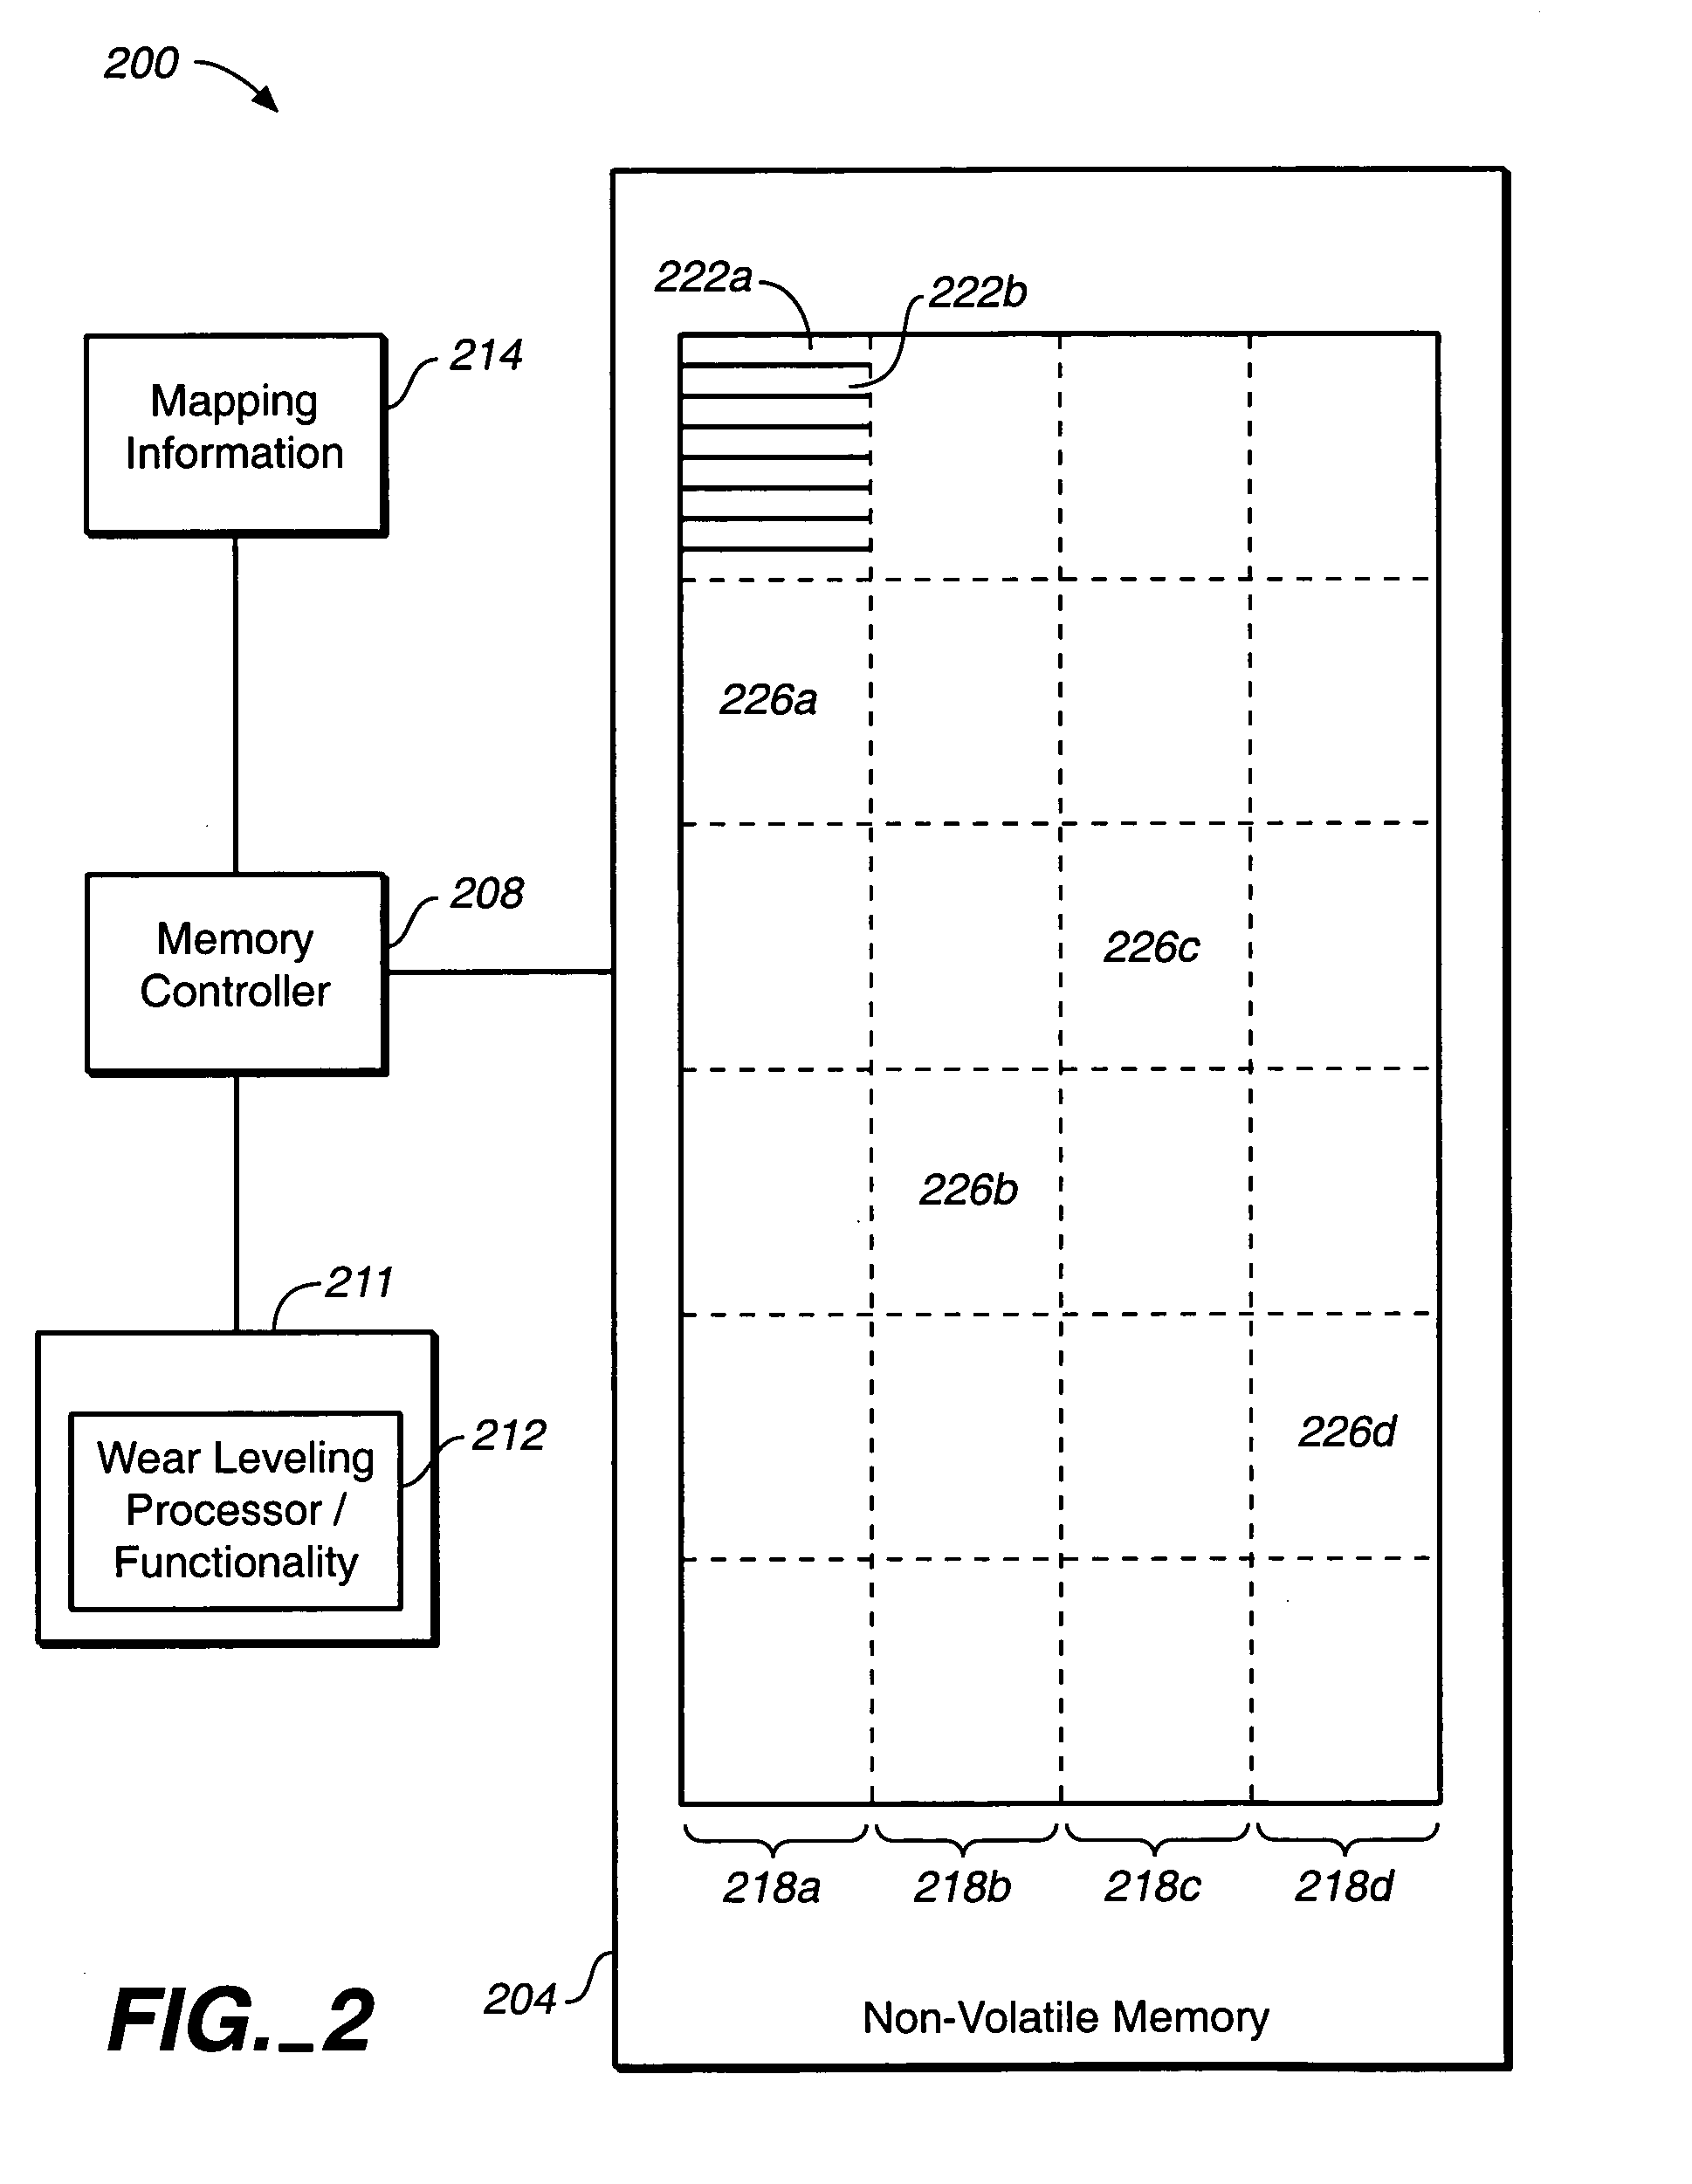 Automated wear leveling in non-volatile storage systems